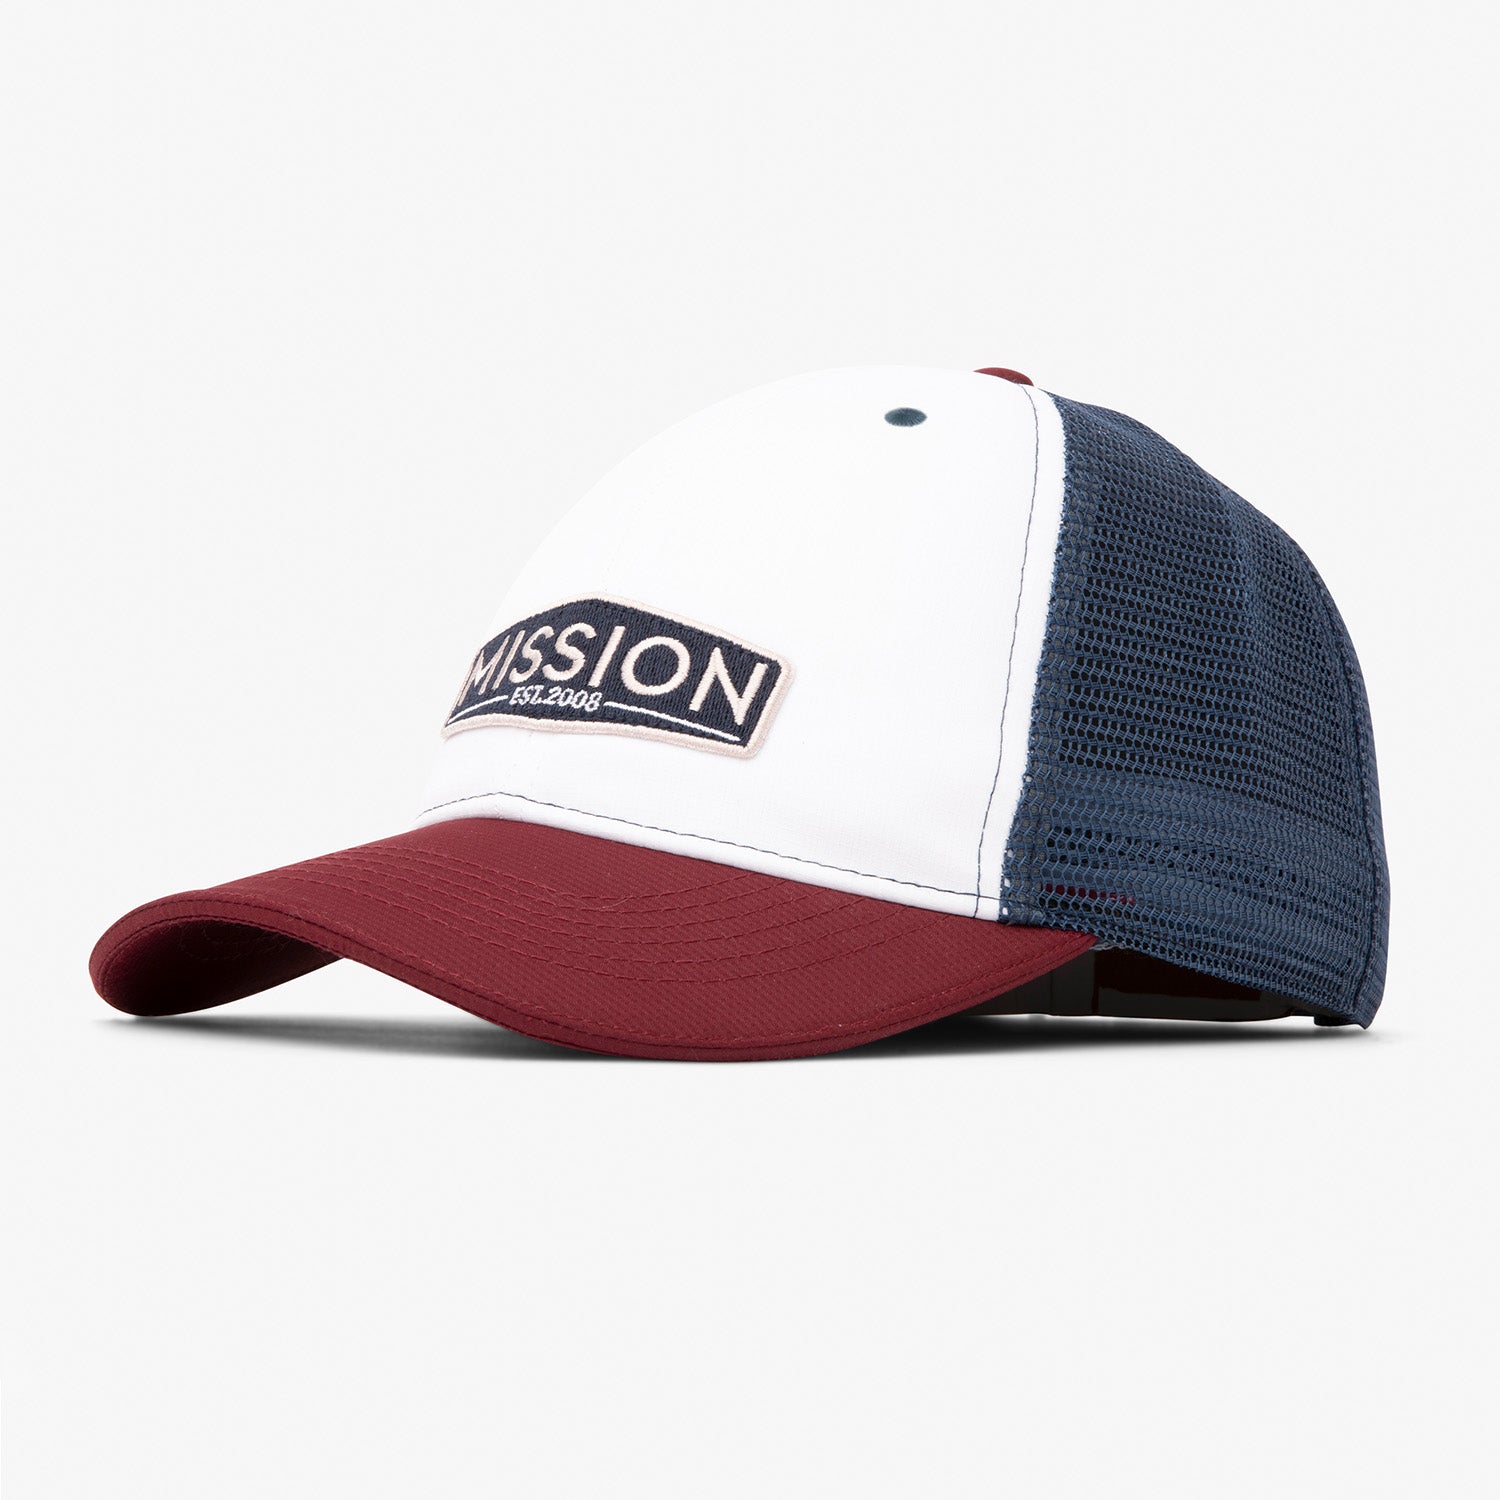 Cooling Westchester Hat Caps MISSION One Size Port 